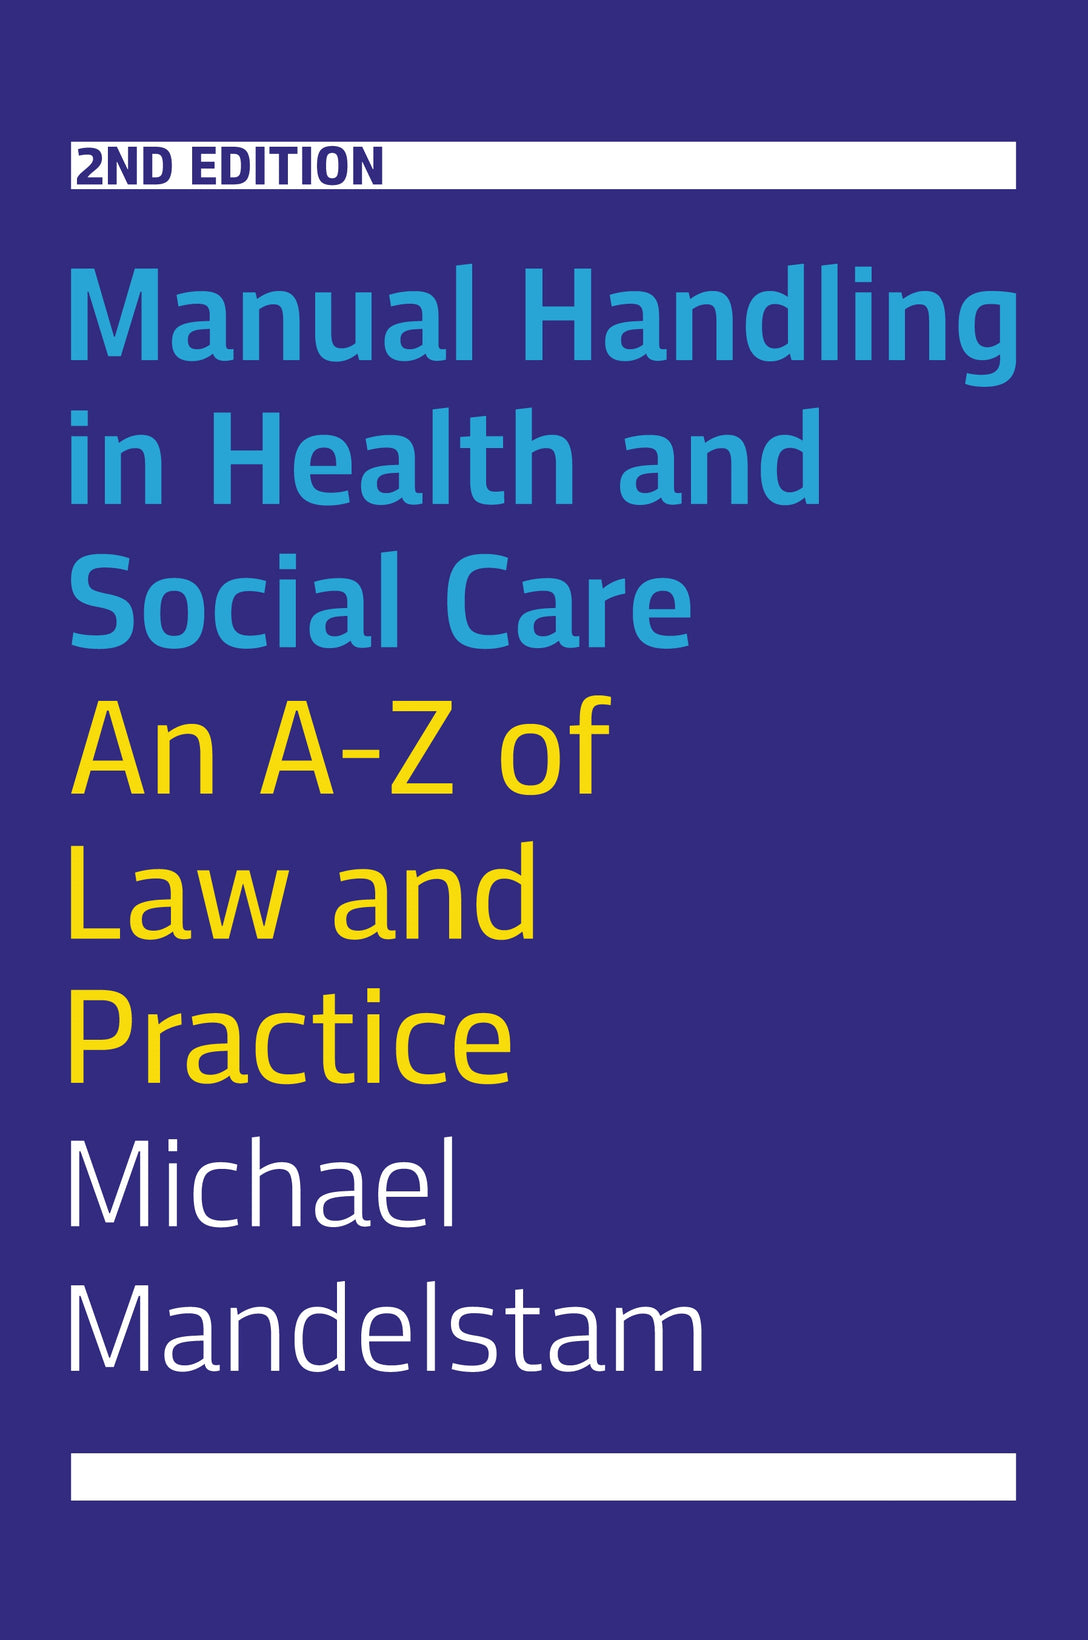 Manual Handling in Health and Social Care, Second Edition by Michael Mandelstam